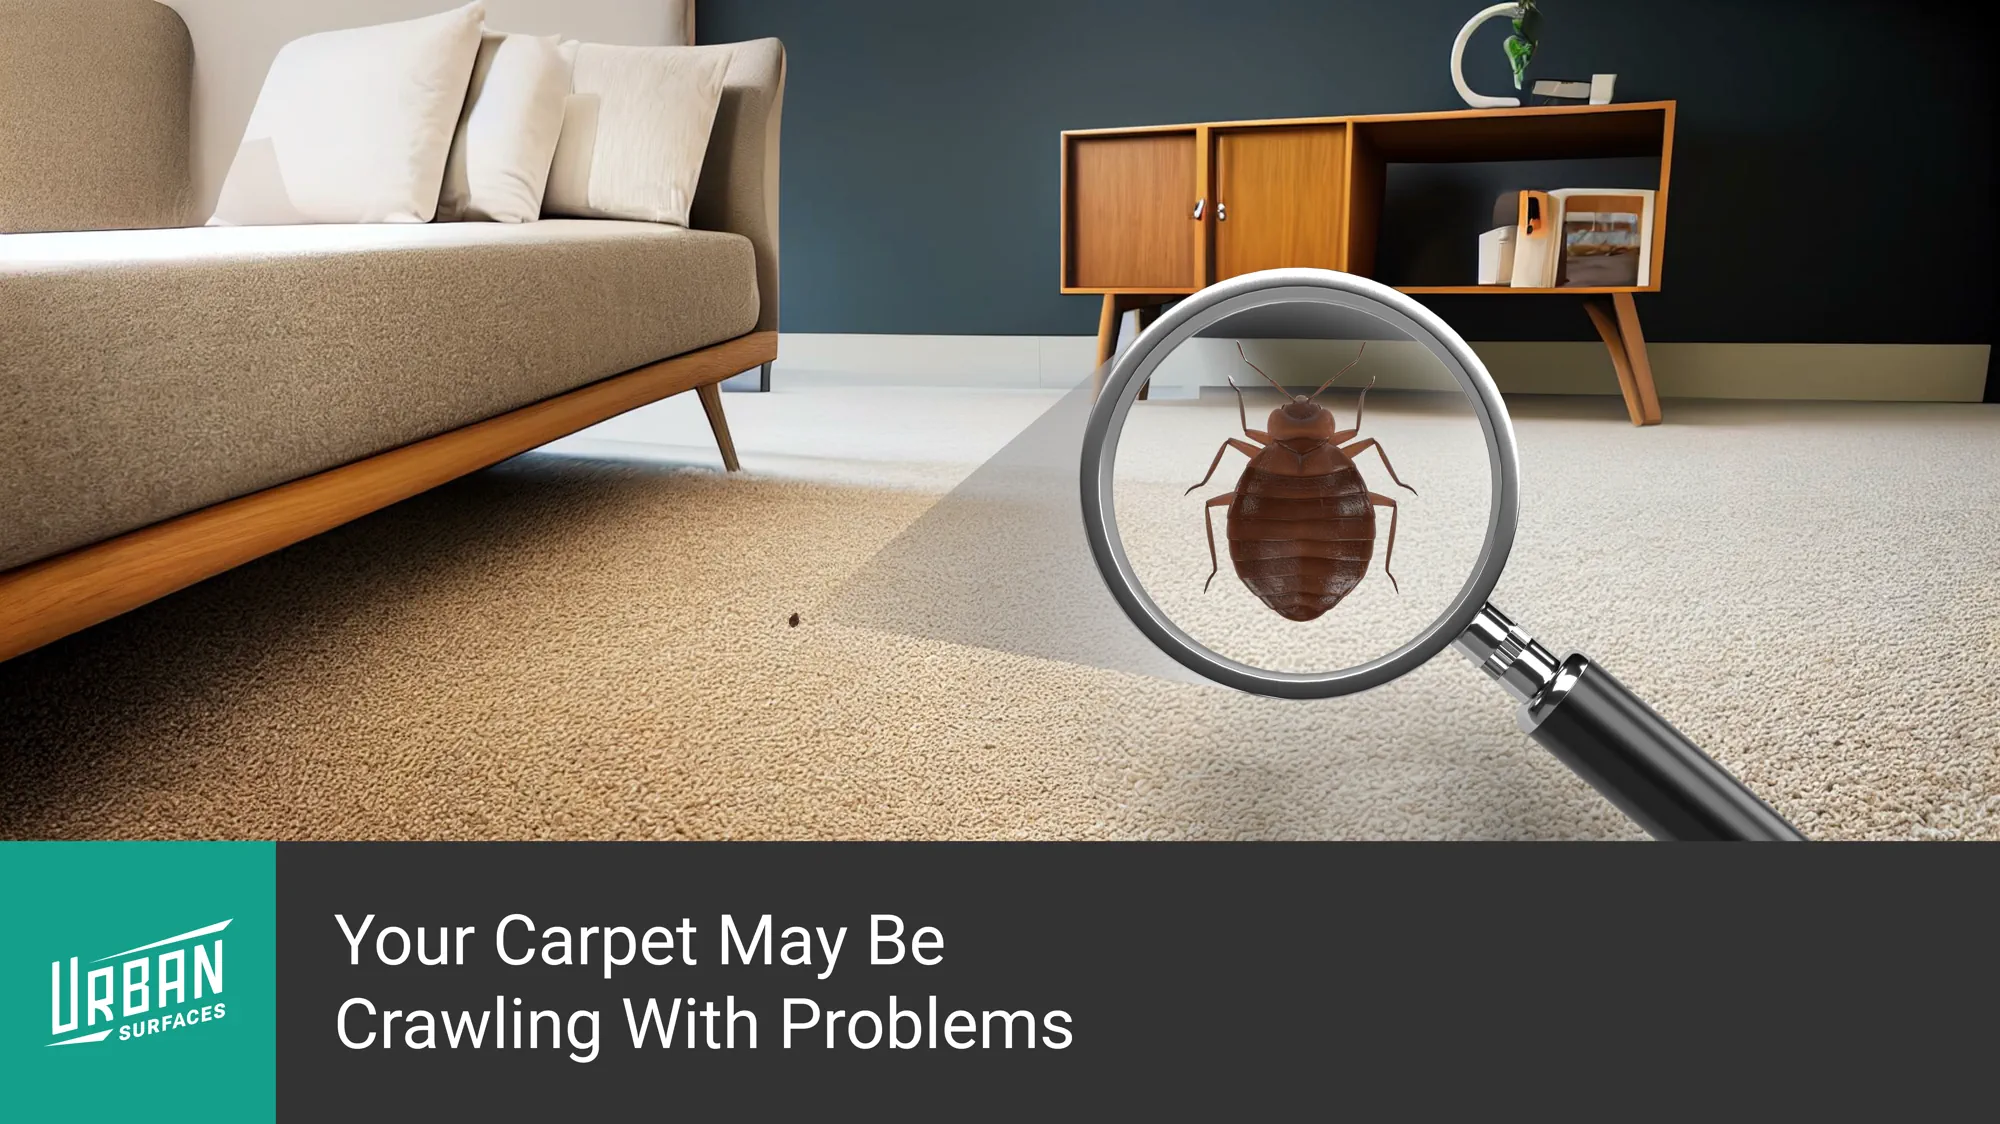 Magnified image of a bug living in carpets. Title: Your Carpet May Be Crawling With Problems.